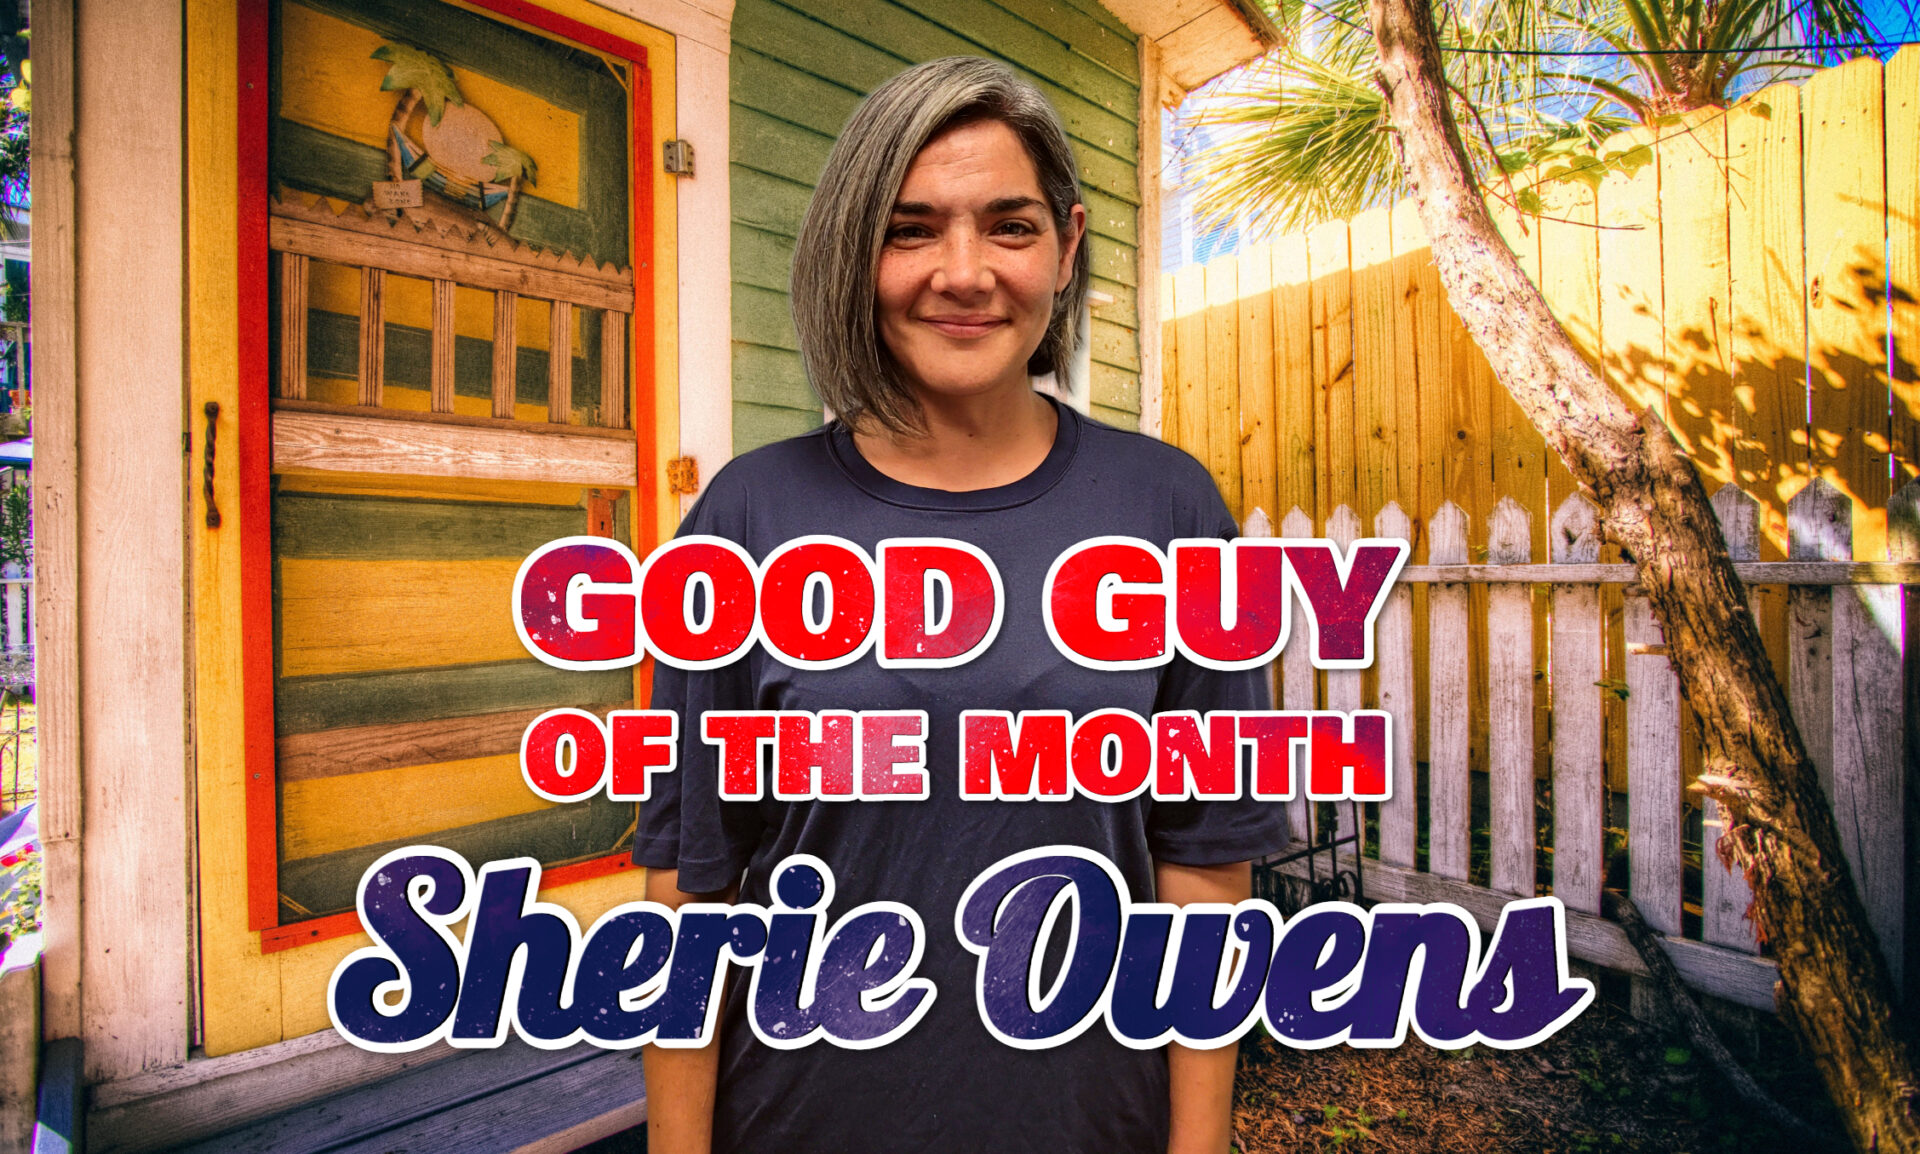 Good Guy of the Month: Sherie Owens